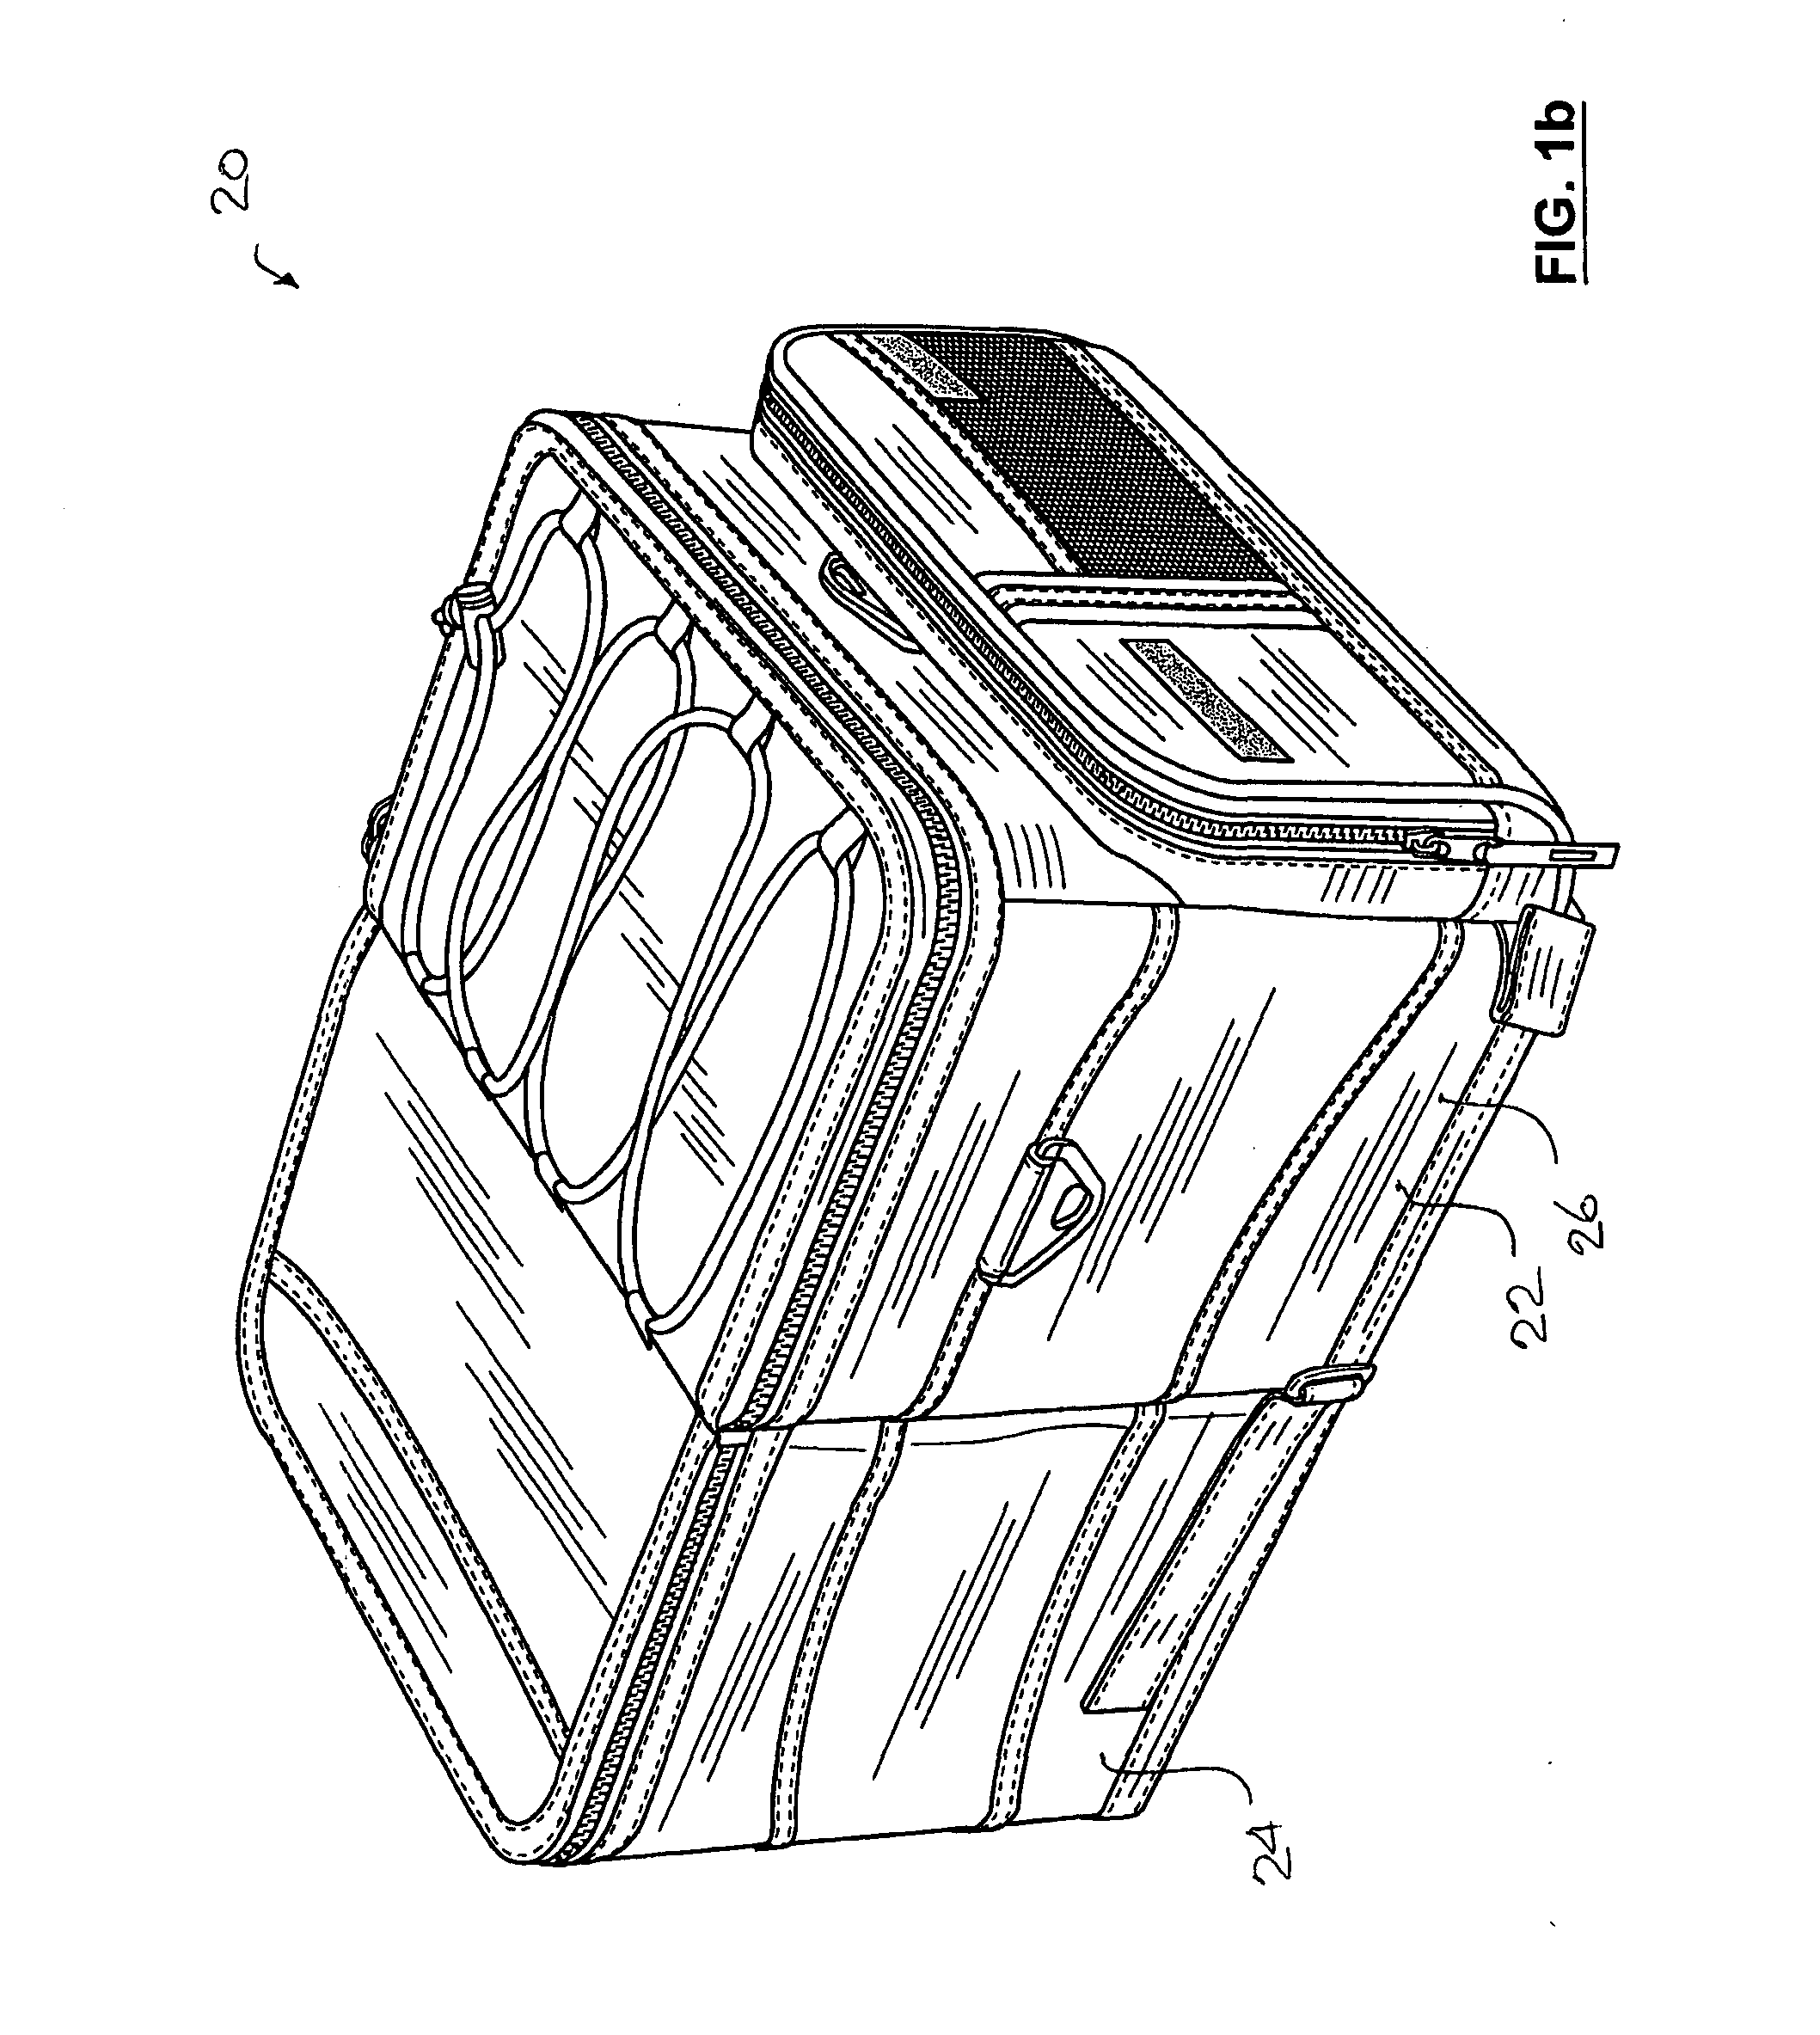 Container with reinforced and collapsible portions